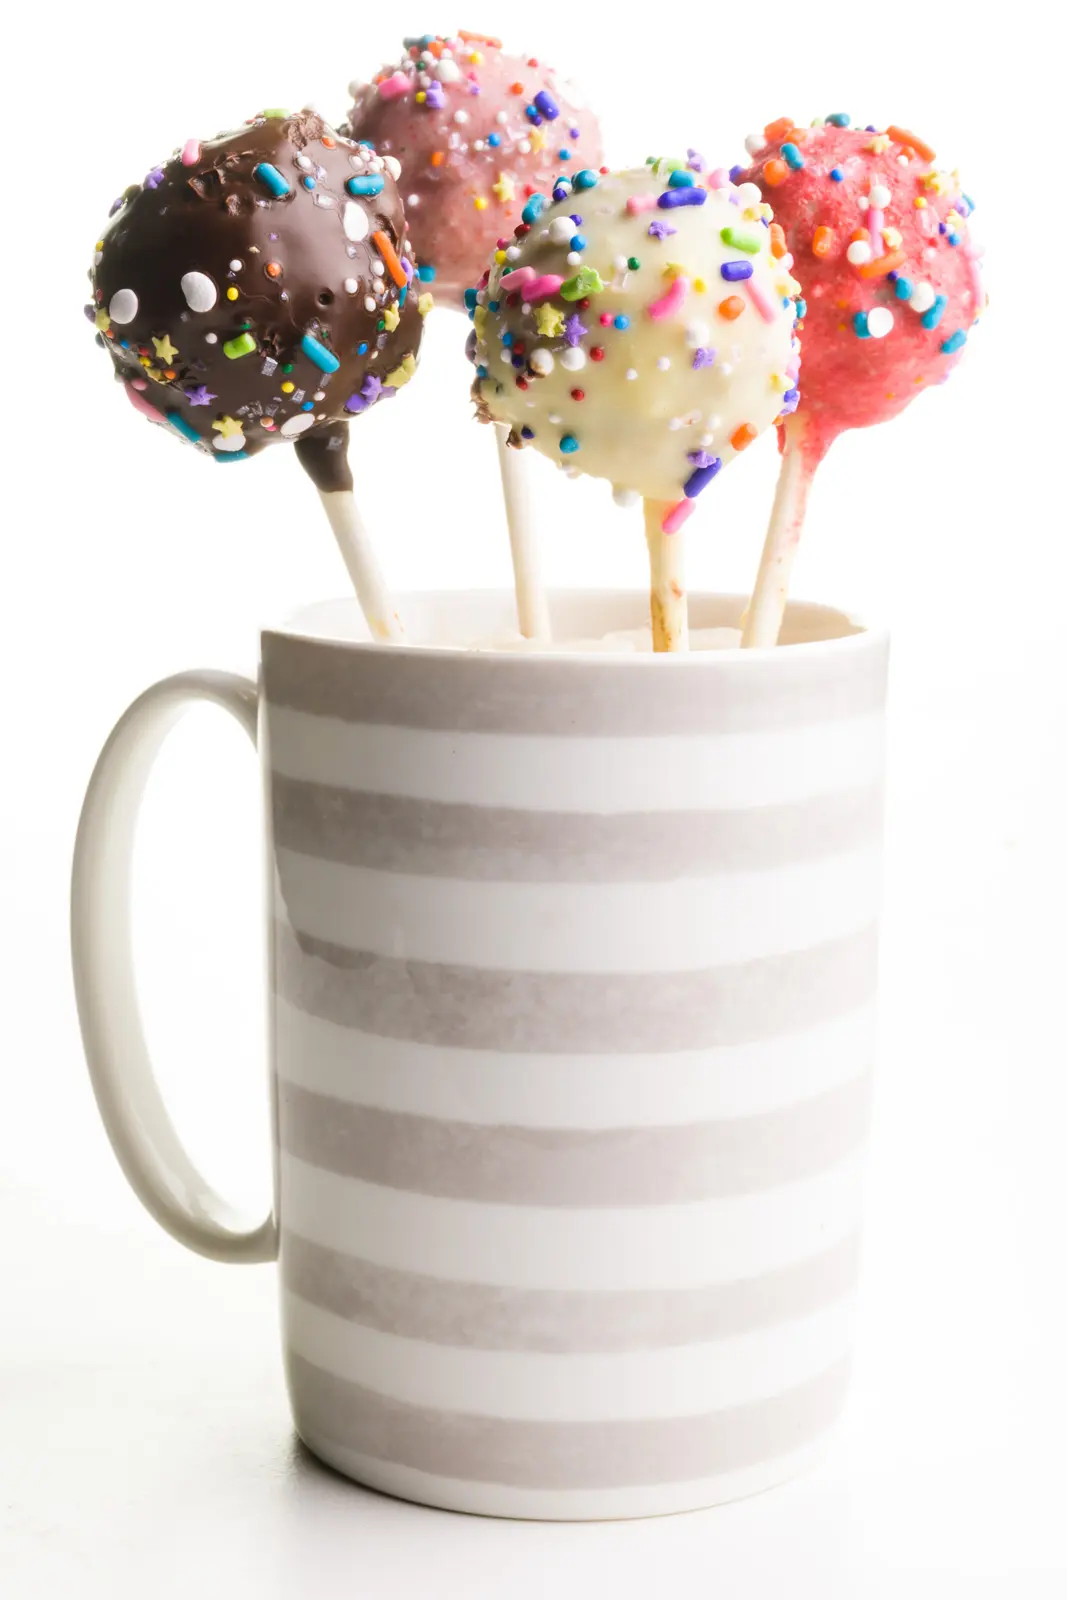 A grey and white striped coffee mug holds several cake balls on a stick. They're each decorated in different colors with sprinkles.